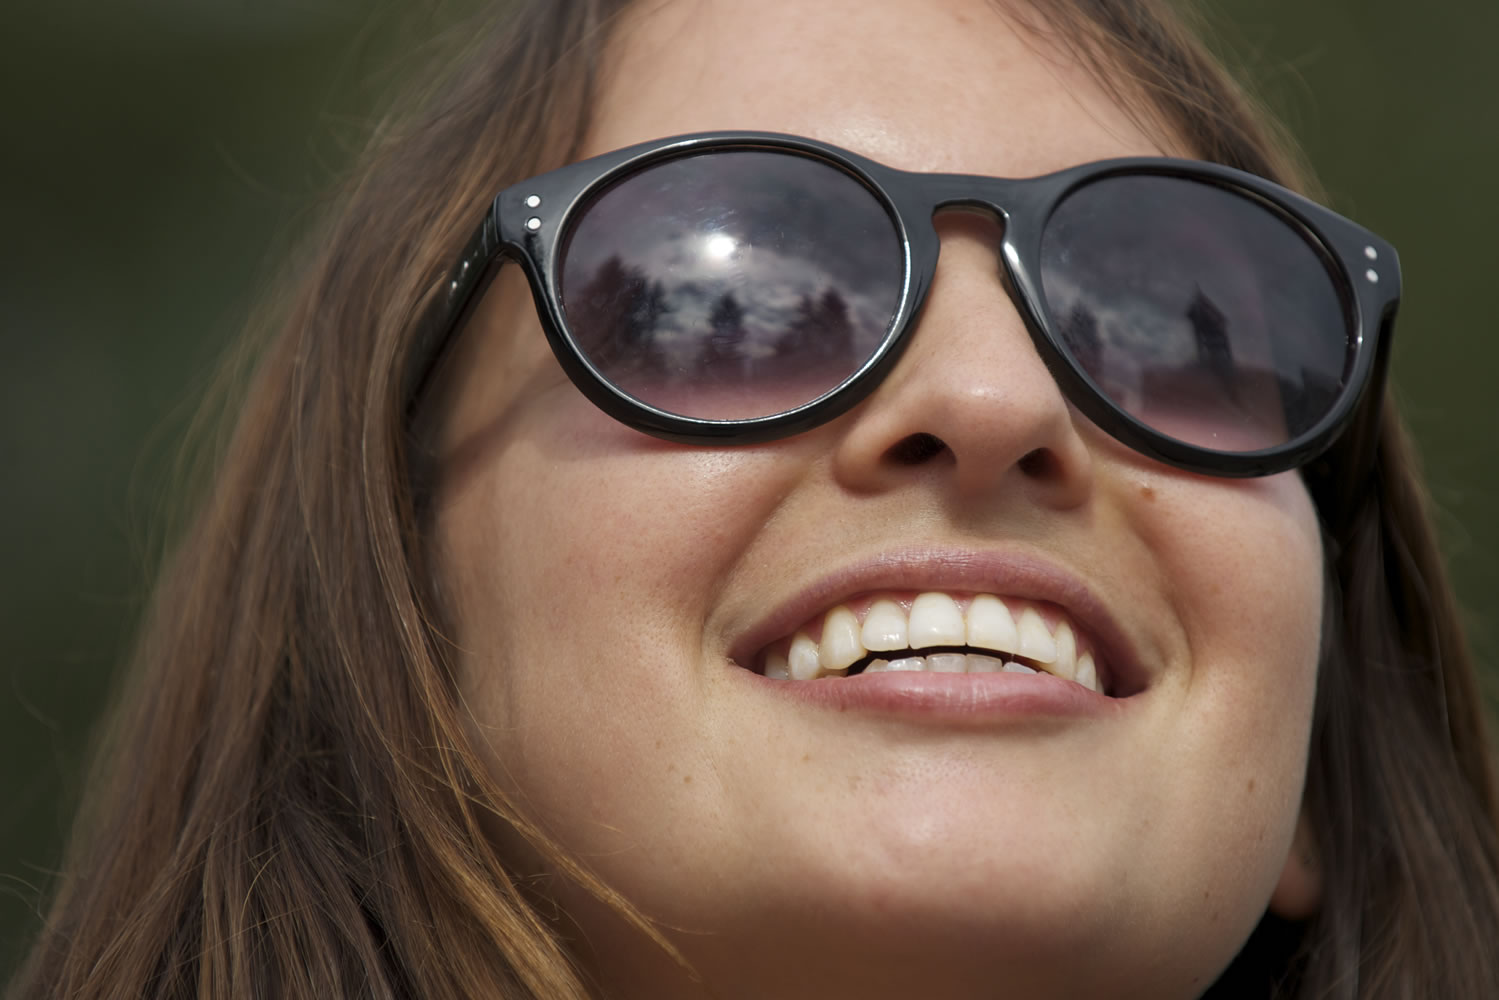 Olivia Orozco of Brooklyn, N.Y., models her sunglasses while in Esther Short Park in Vancouver on Wednesday.